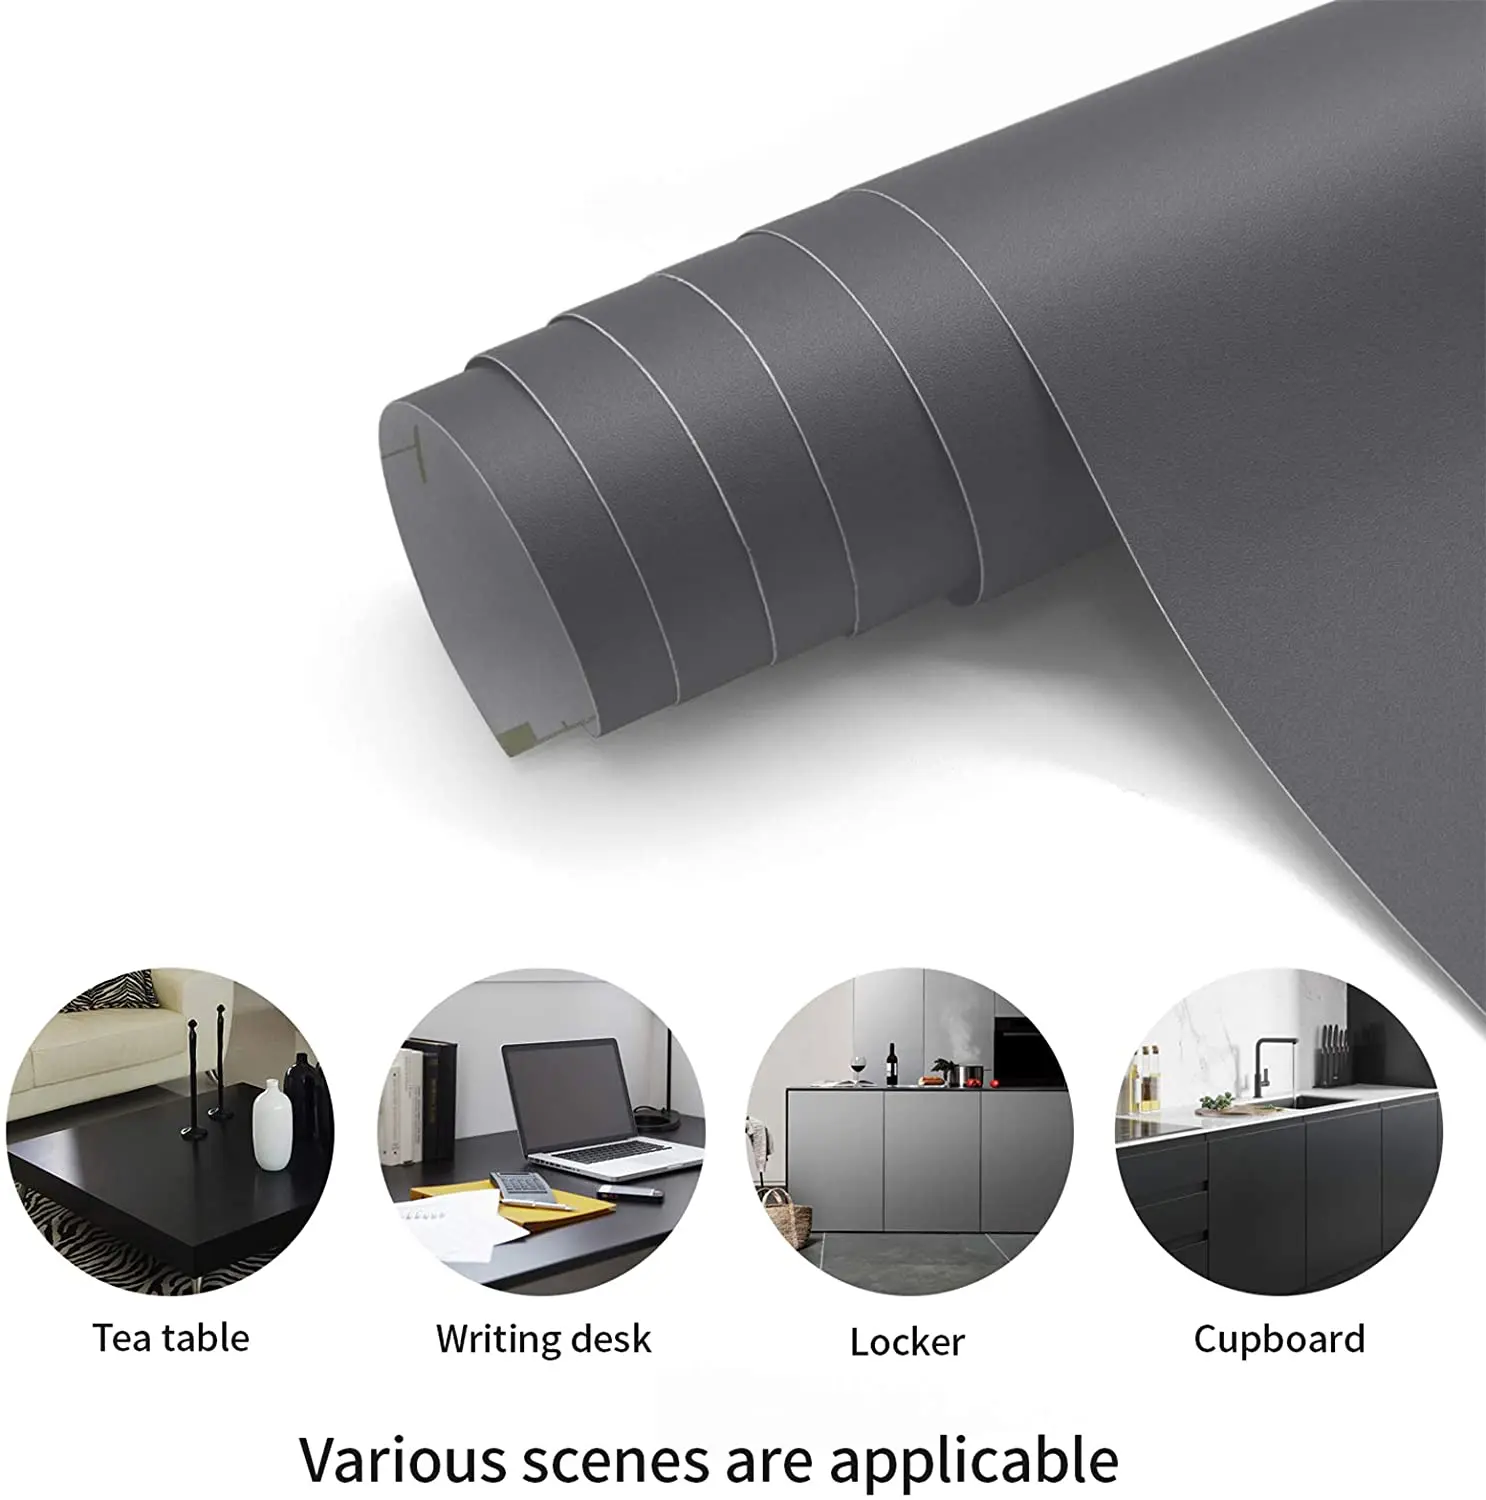 PVC Wallpaper Decoration Vinyl Matte Black Self-adhesive Paper,  Bedroom Furniture Wall Hanging Waterproof Kitchen 60x 5M brass 360 degree rotating deck matte black 3 way water drinking water purified water cold hot kitchen sink faucet top quality